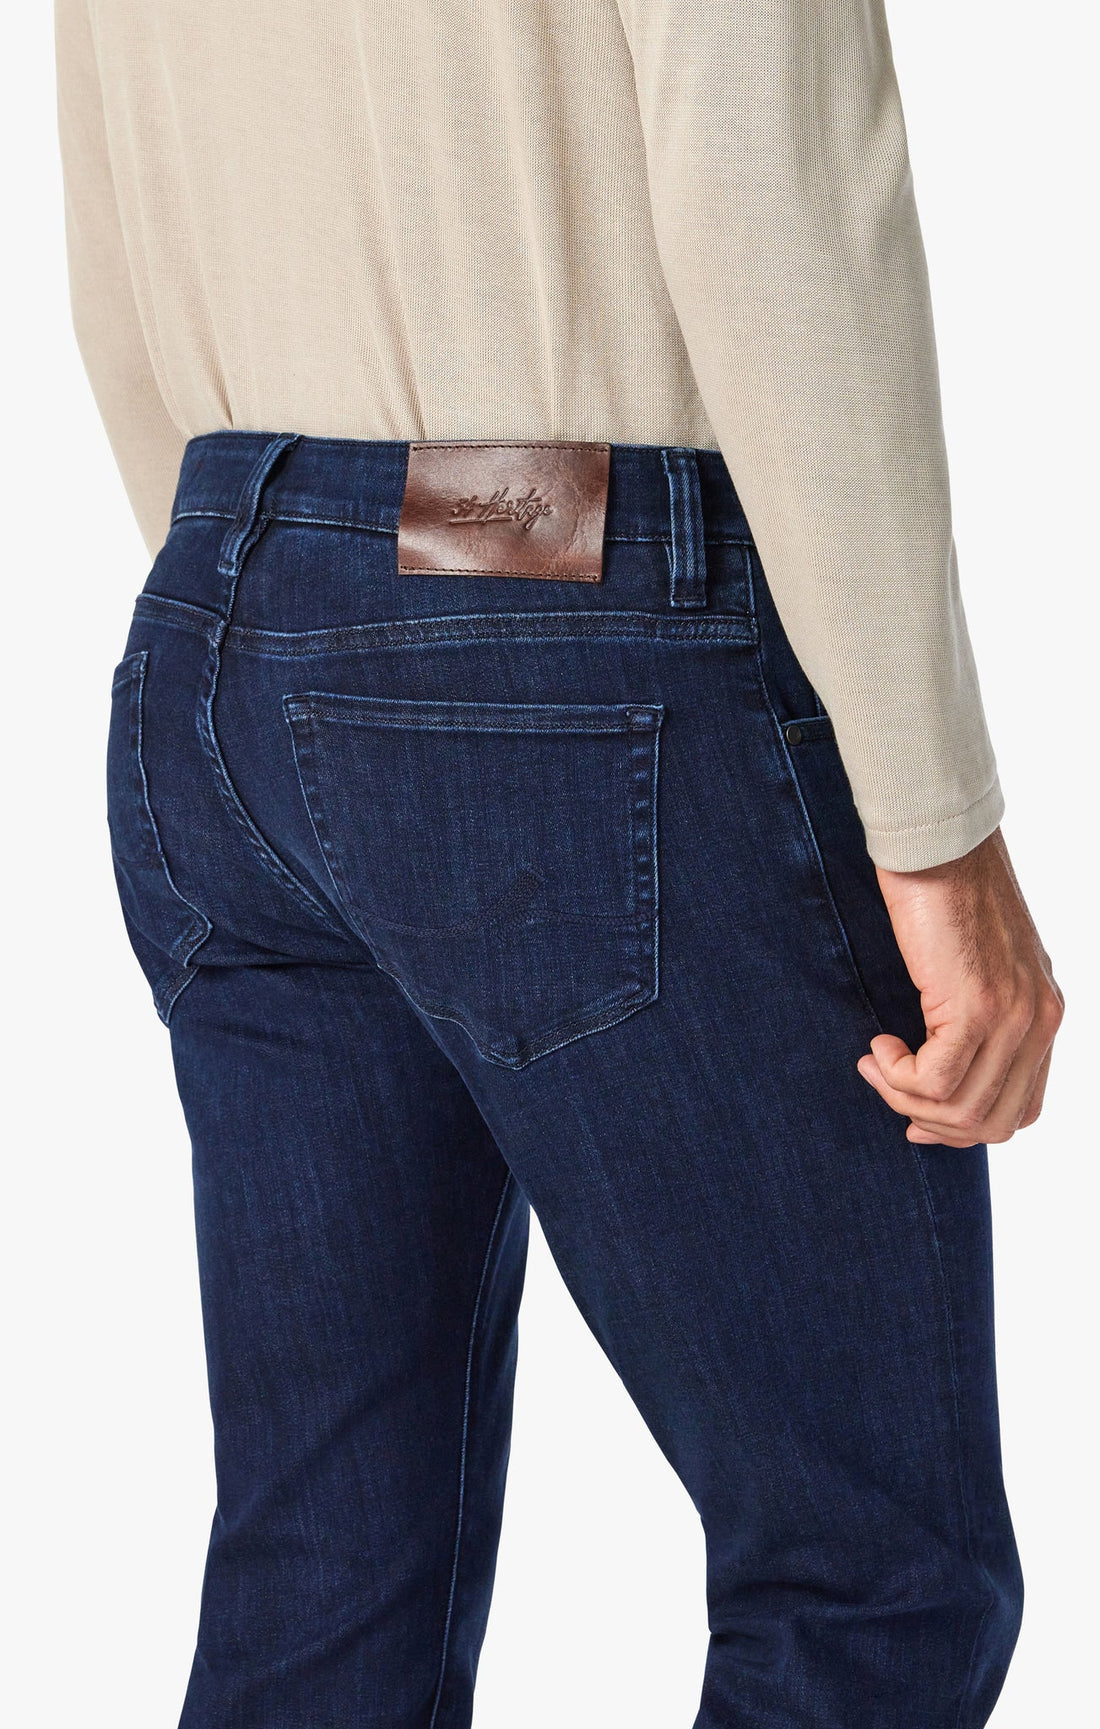 Courage Brushed Jeans